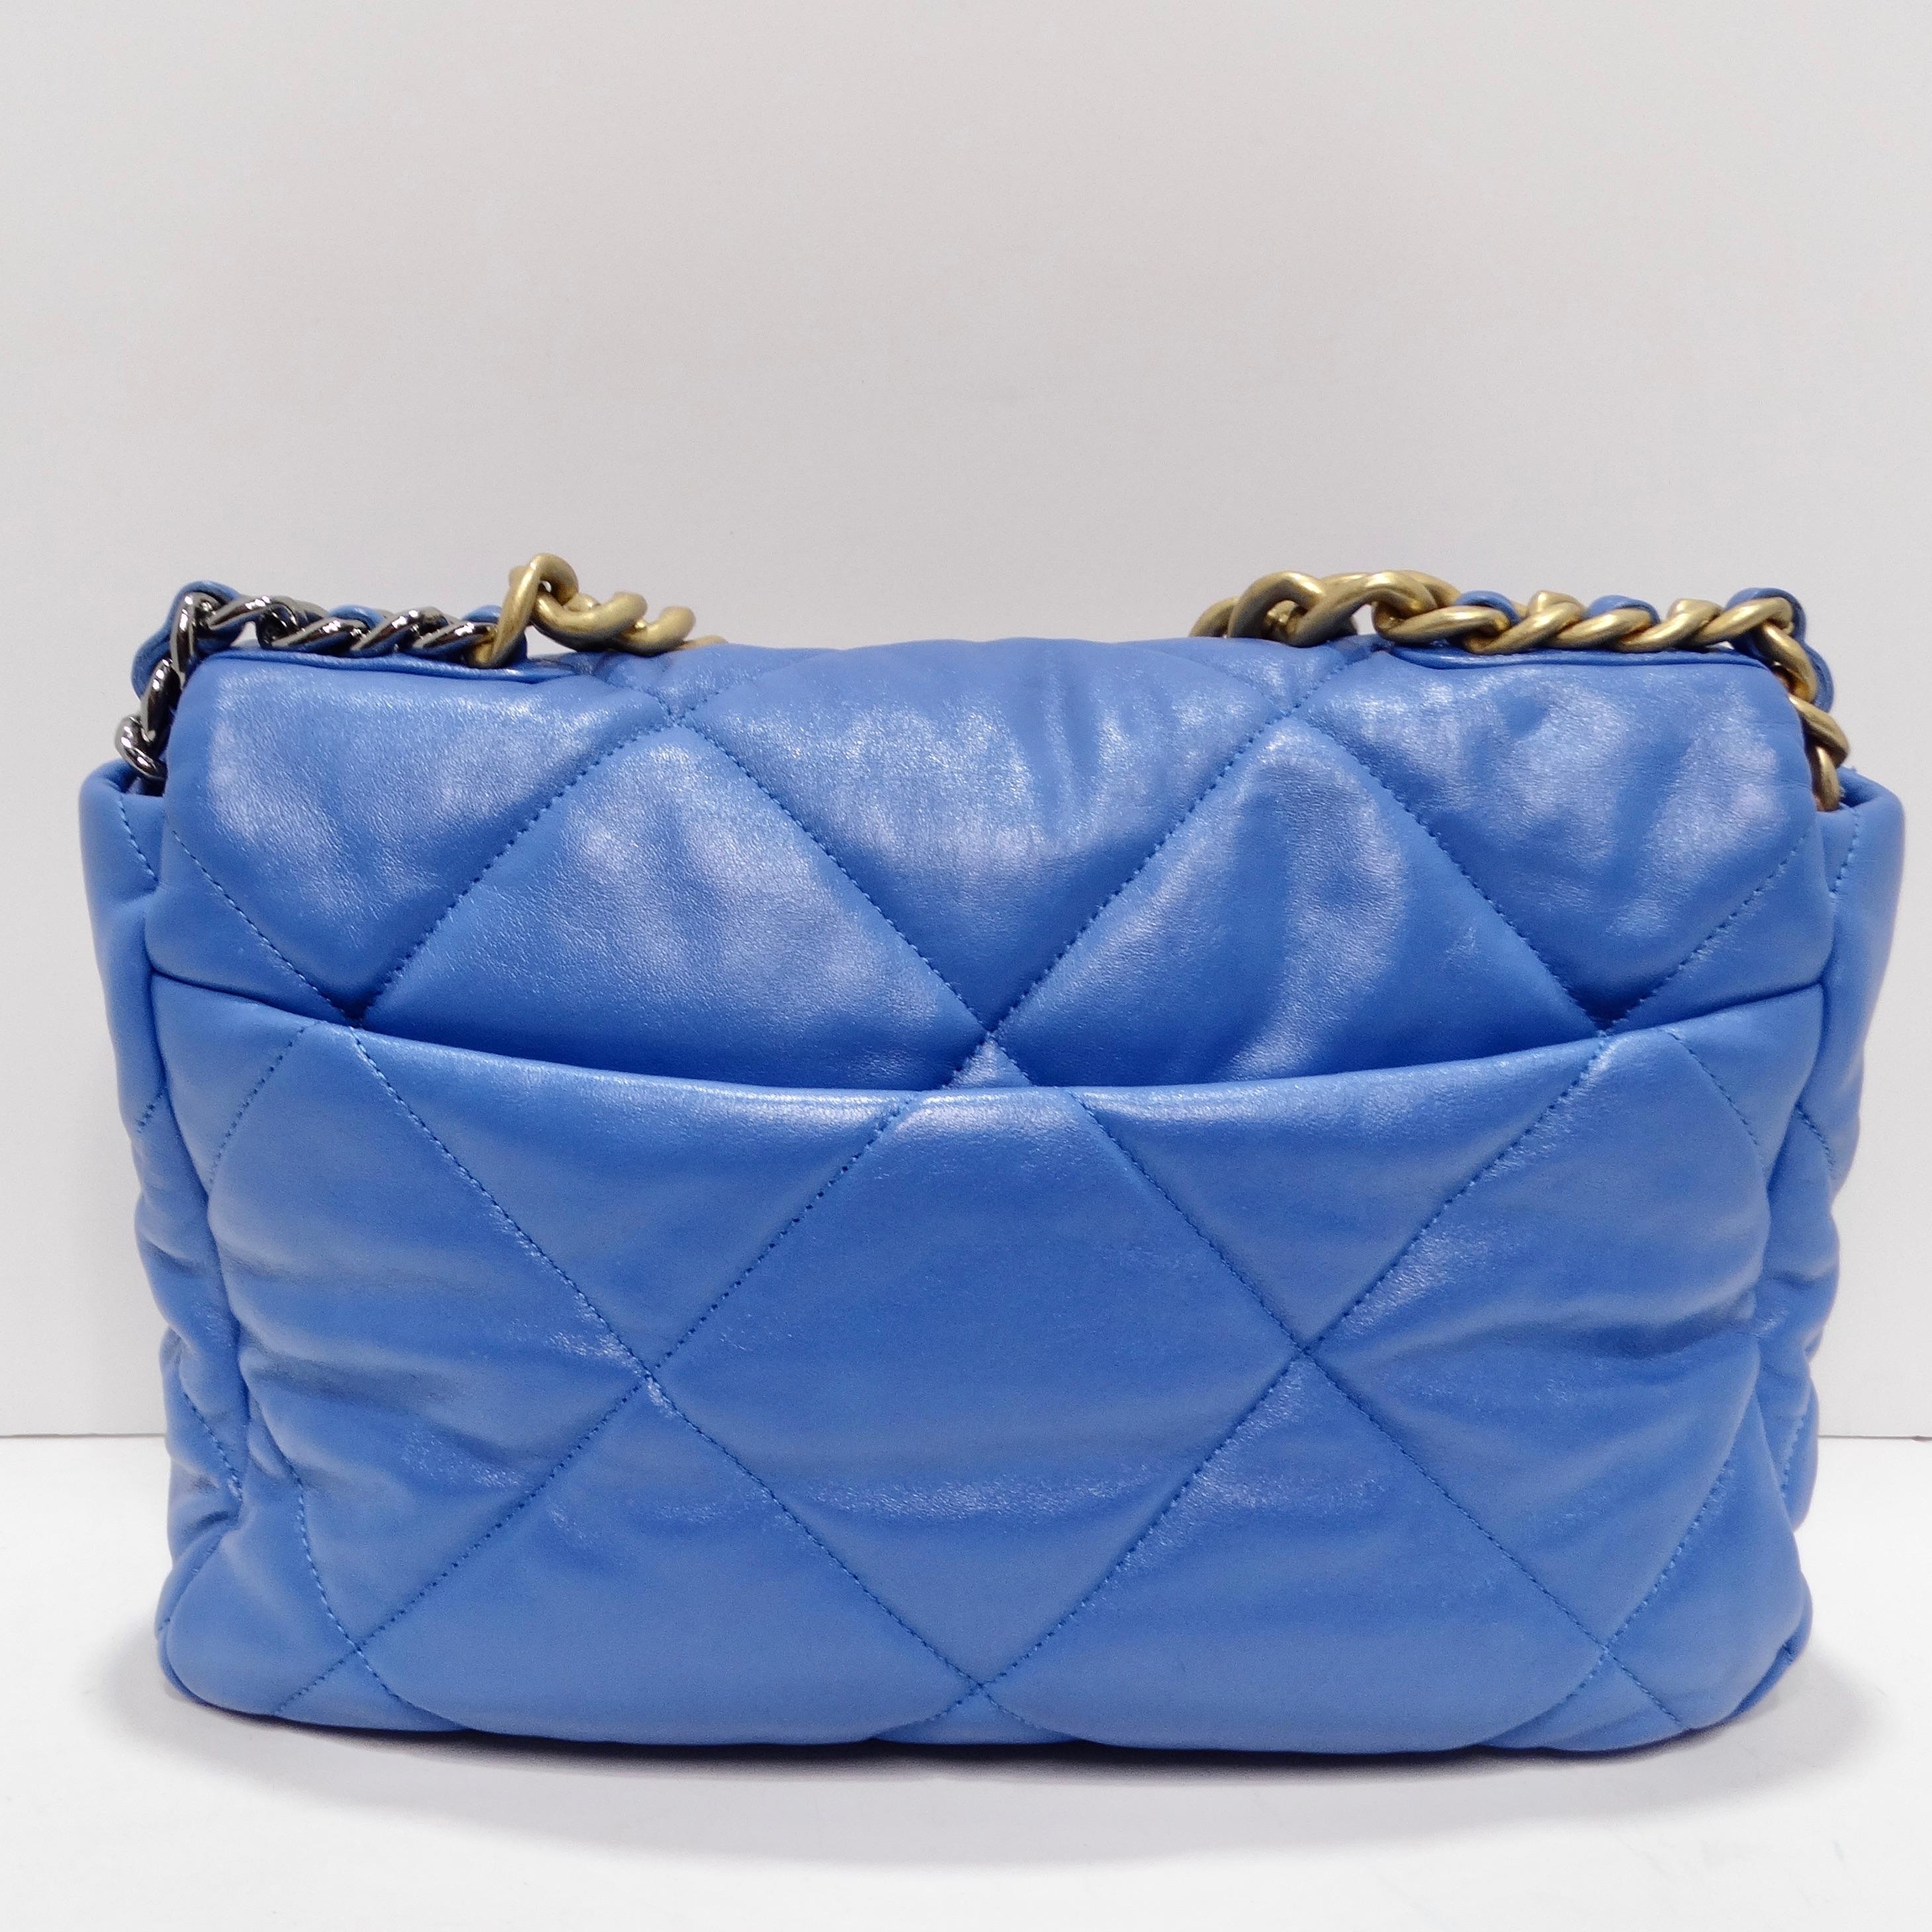 Chanel Lambskin Quilted Medium 19 Flap Bag Blue In Excellent Condition For Sale In Scottsdale, AZ